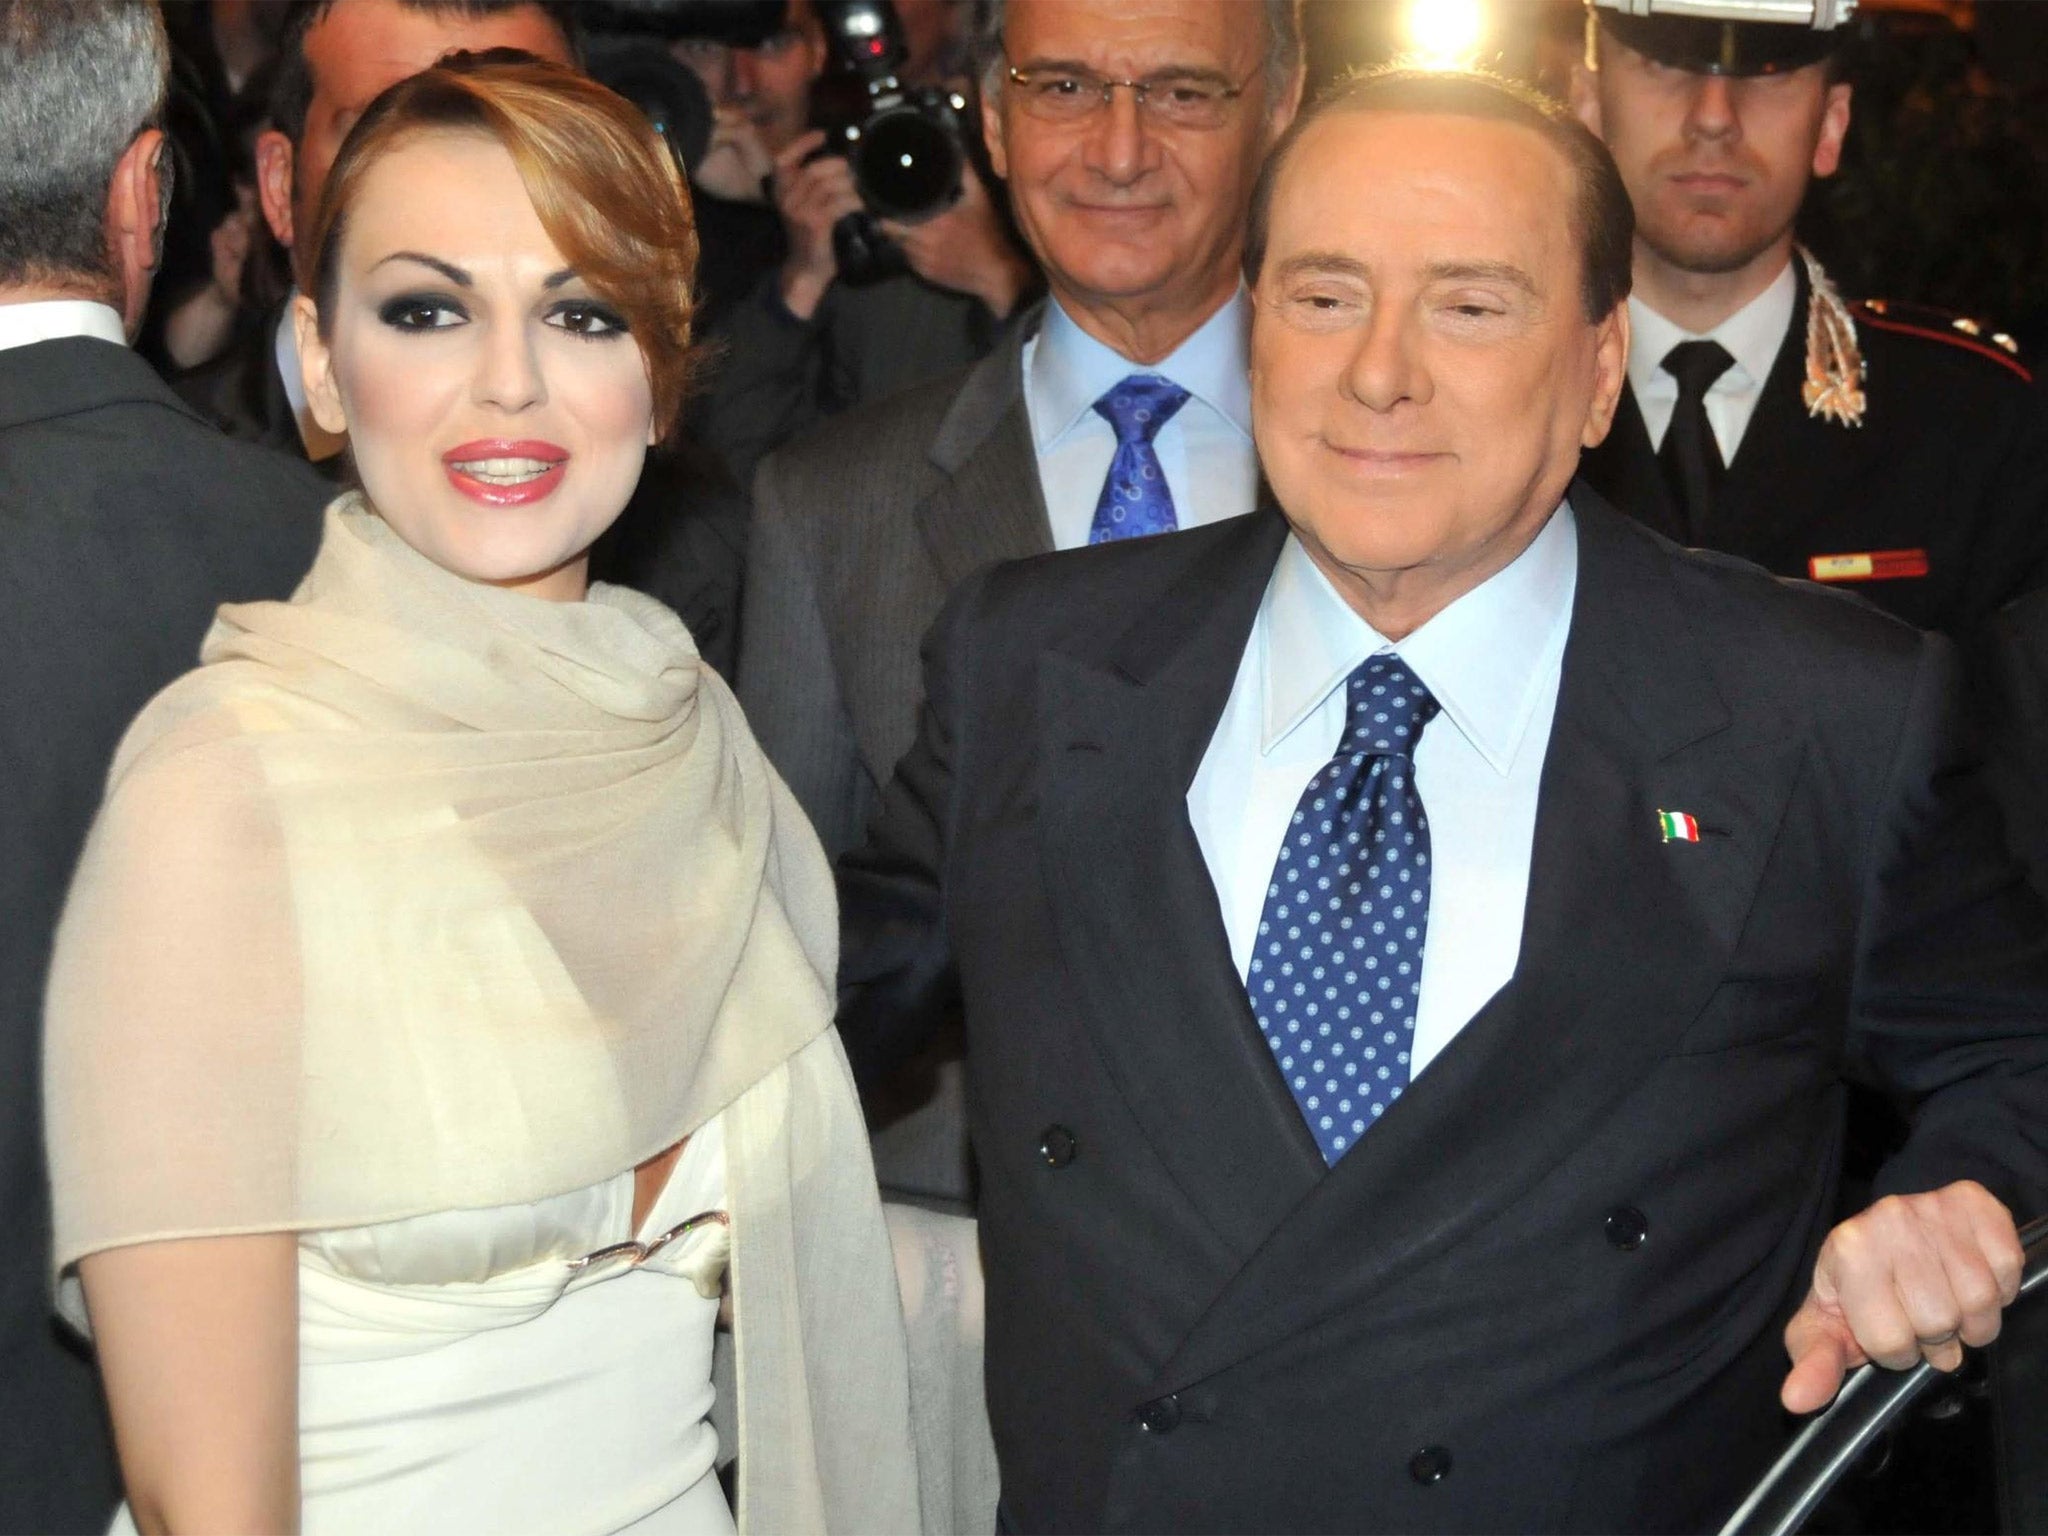 Berlusconi with his girlfriend, Francesca Pascale; they have not been seen together publicly recently